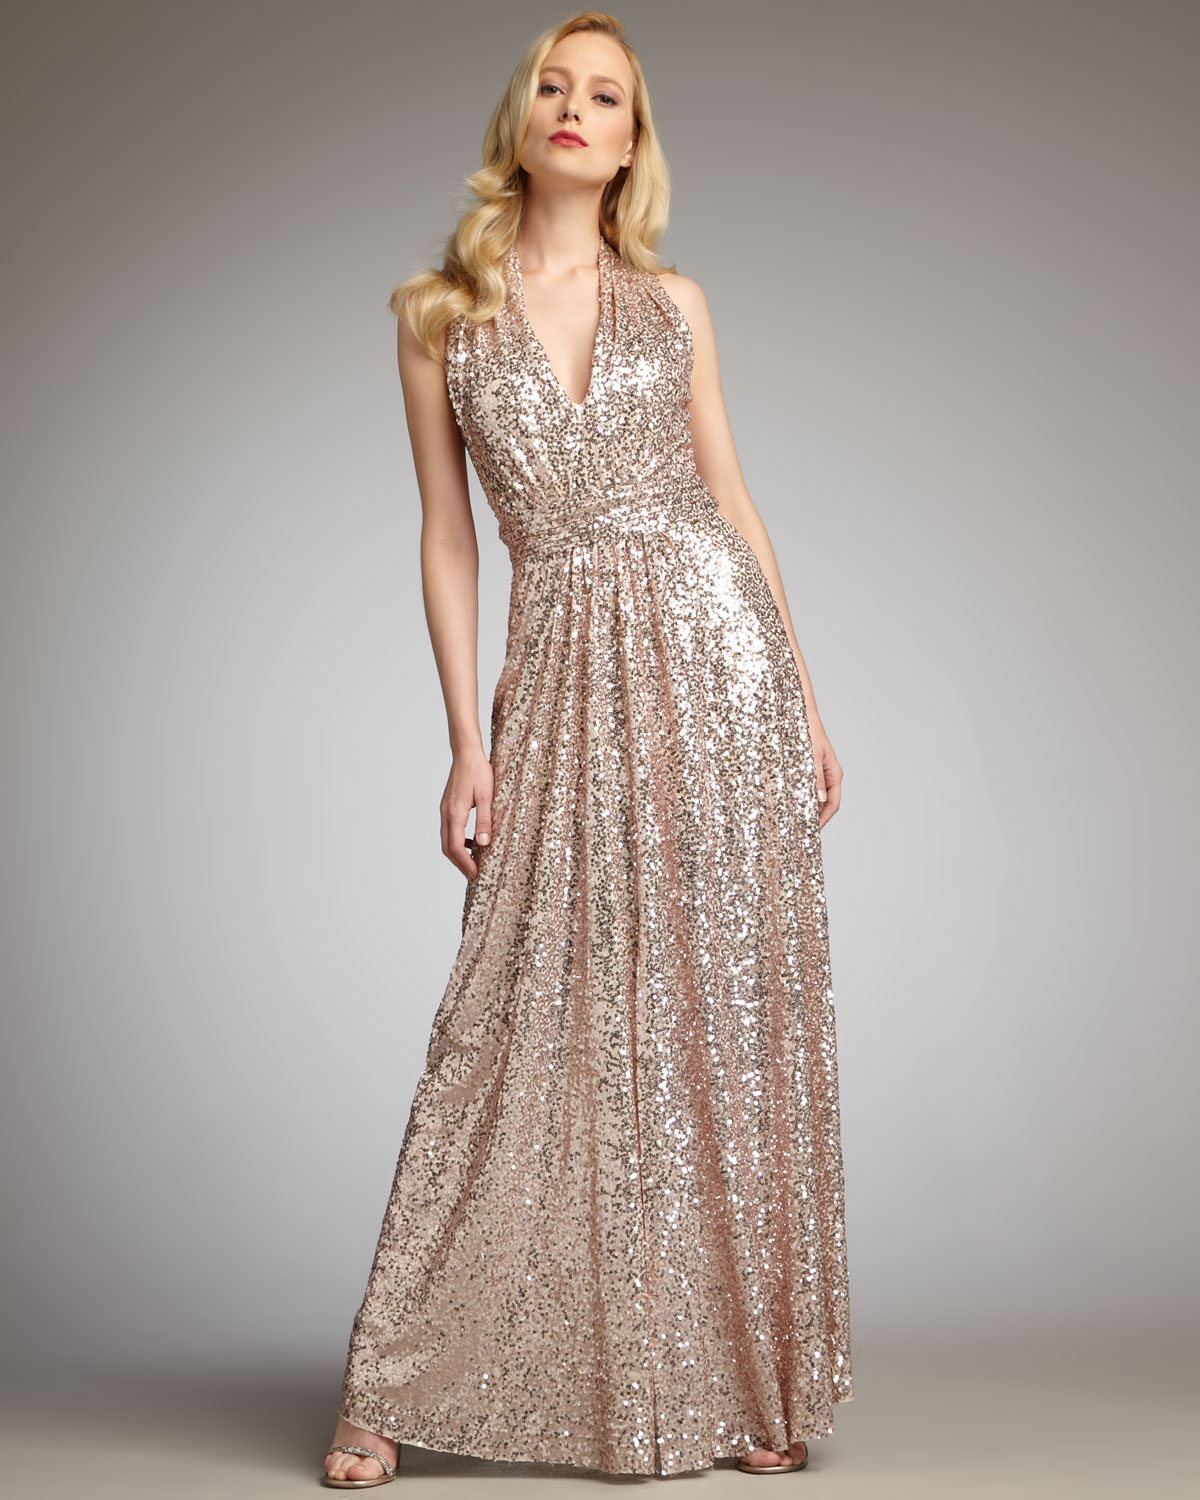 Blush Sequin Maxi Dress - Where To Find In 2017